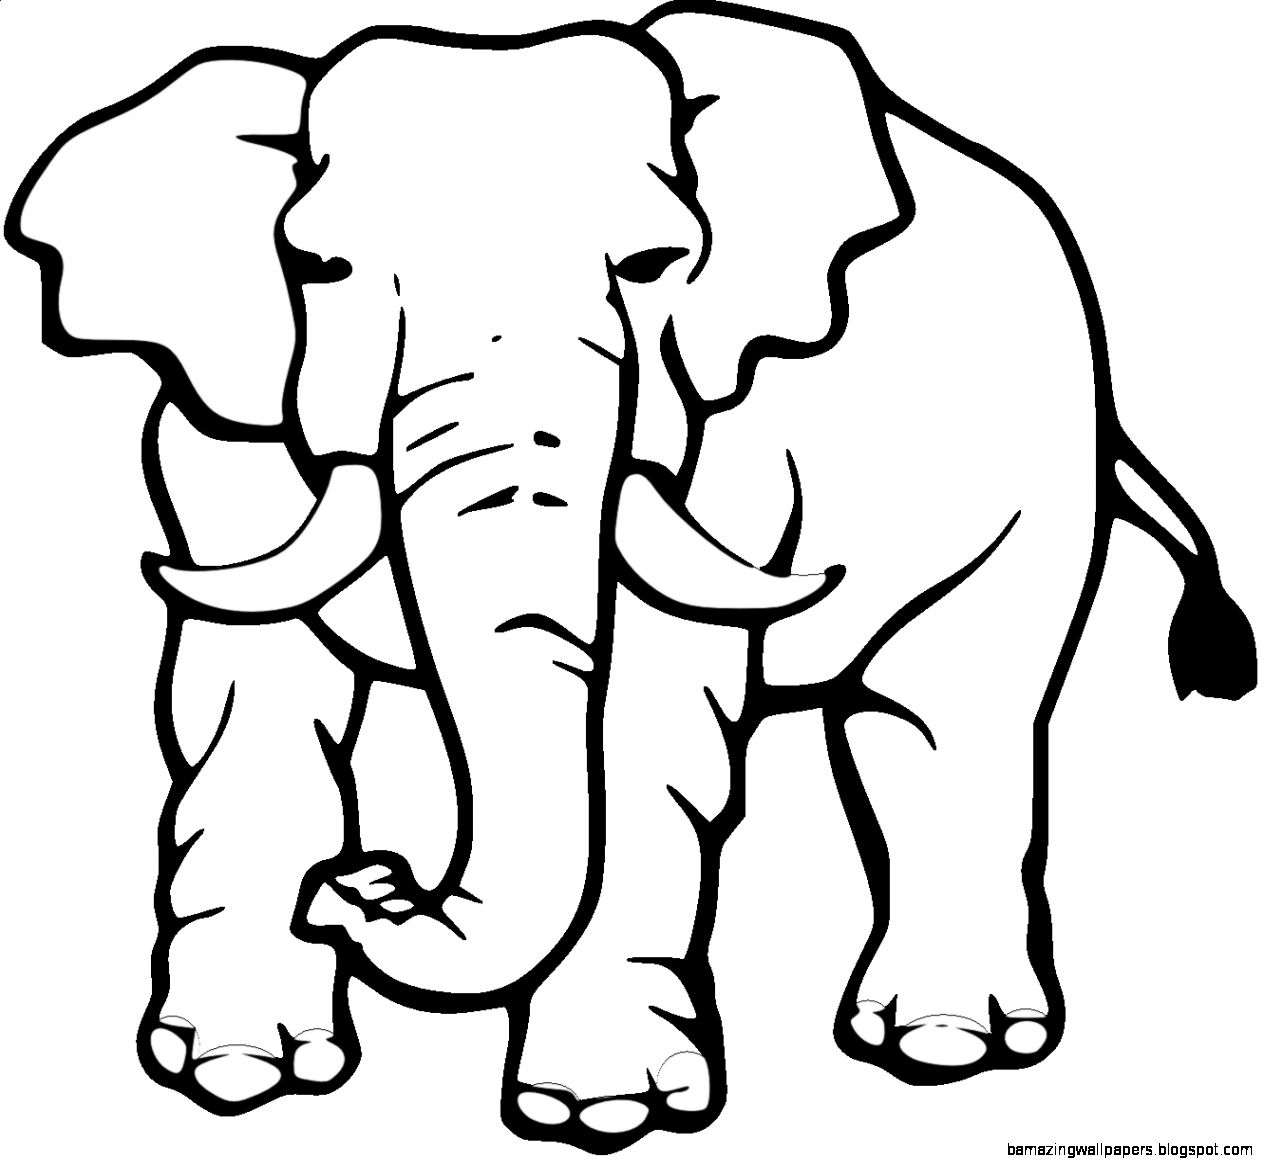 Clipart of elephant in black and white